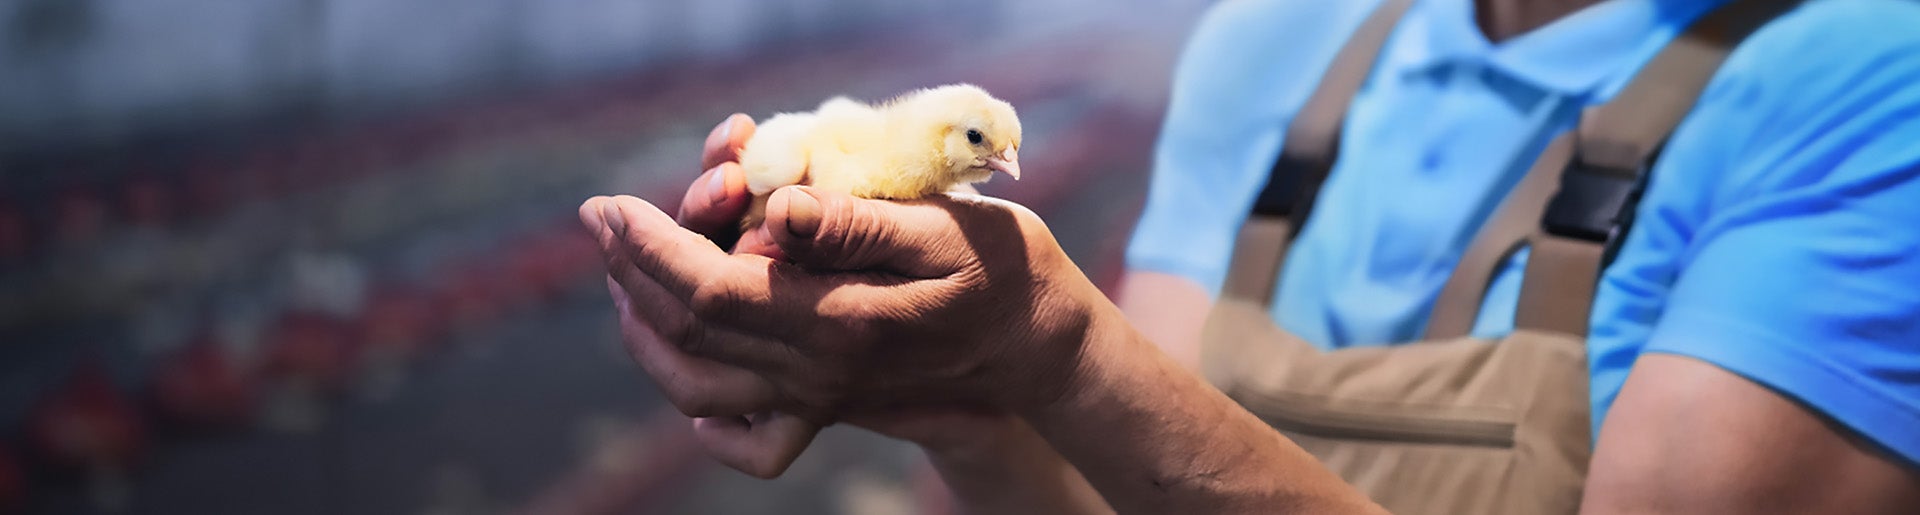 Poultry Producer Holds Healthy Chick In Chicken House